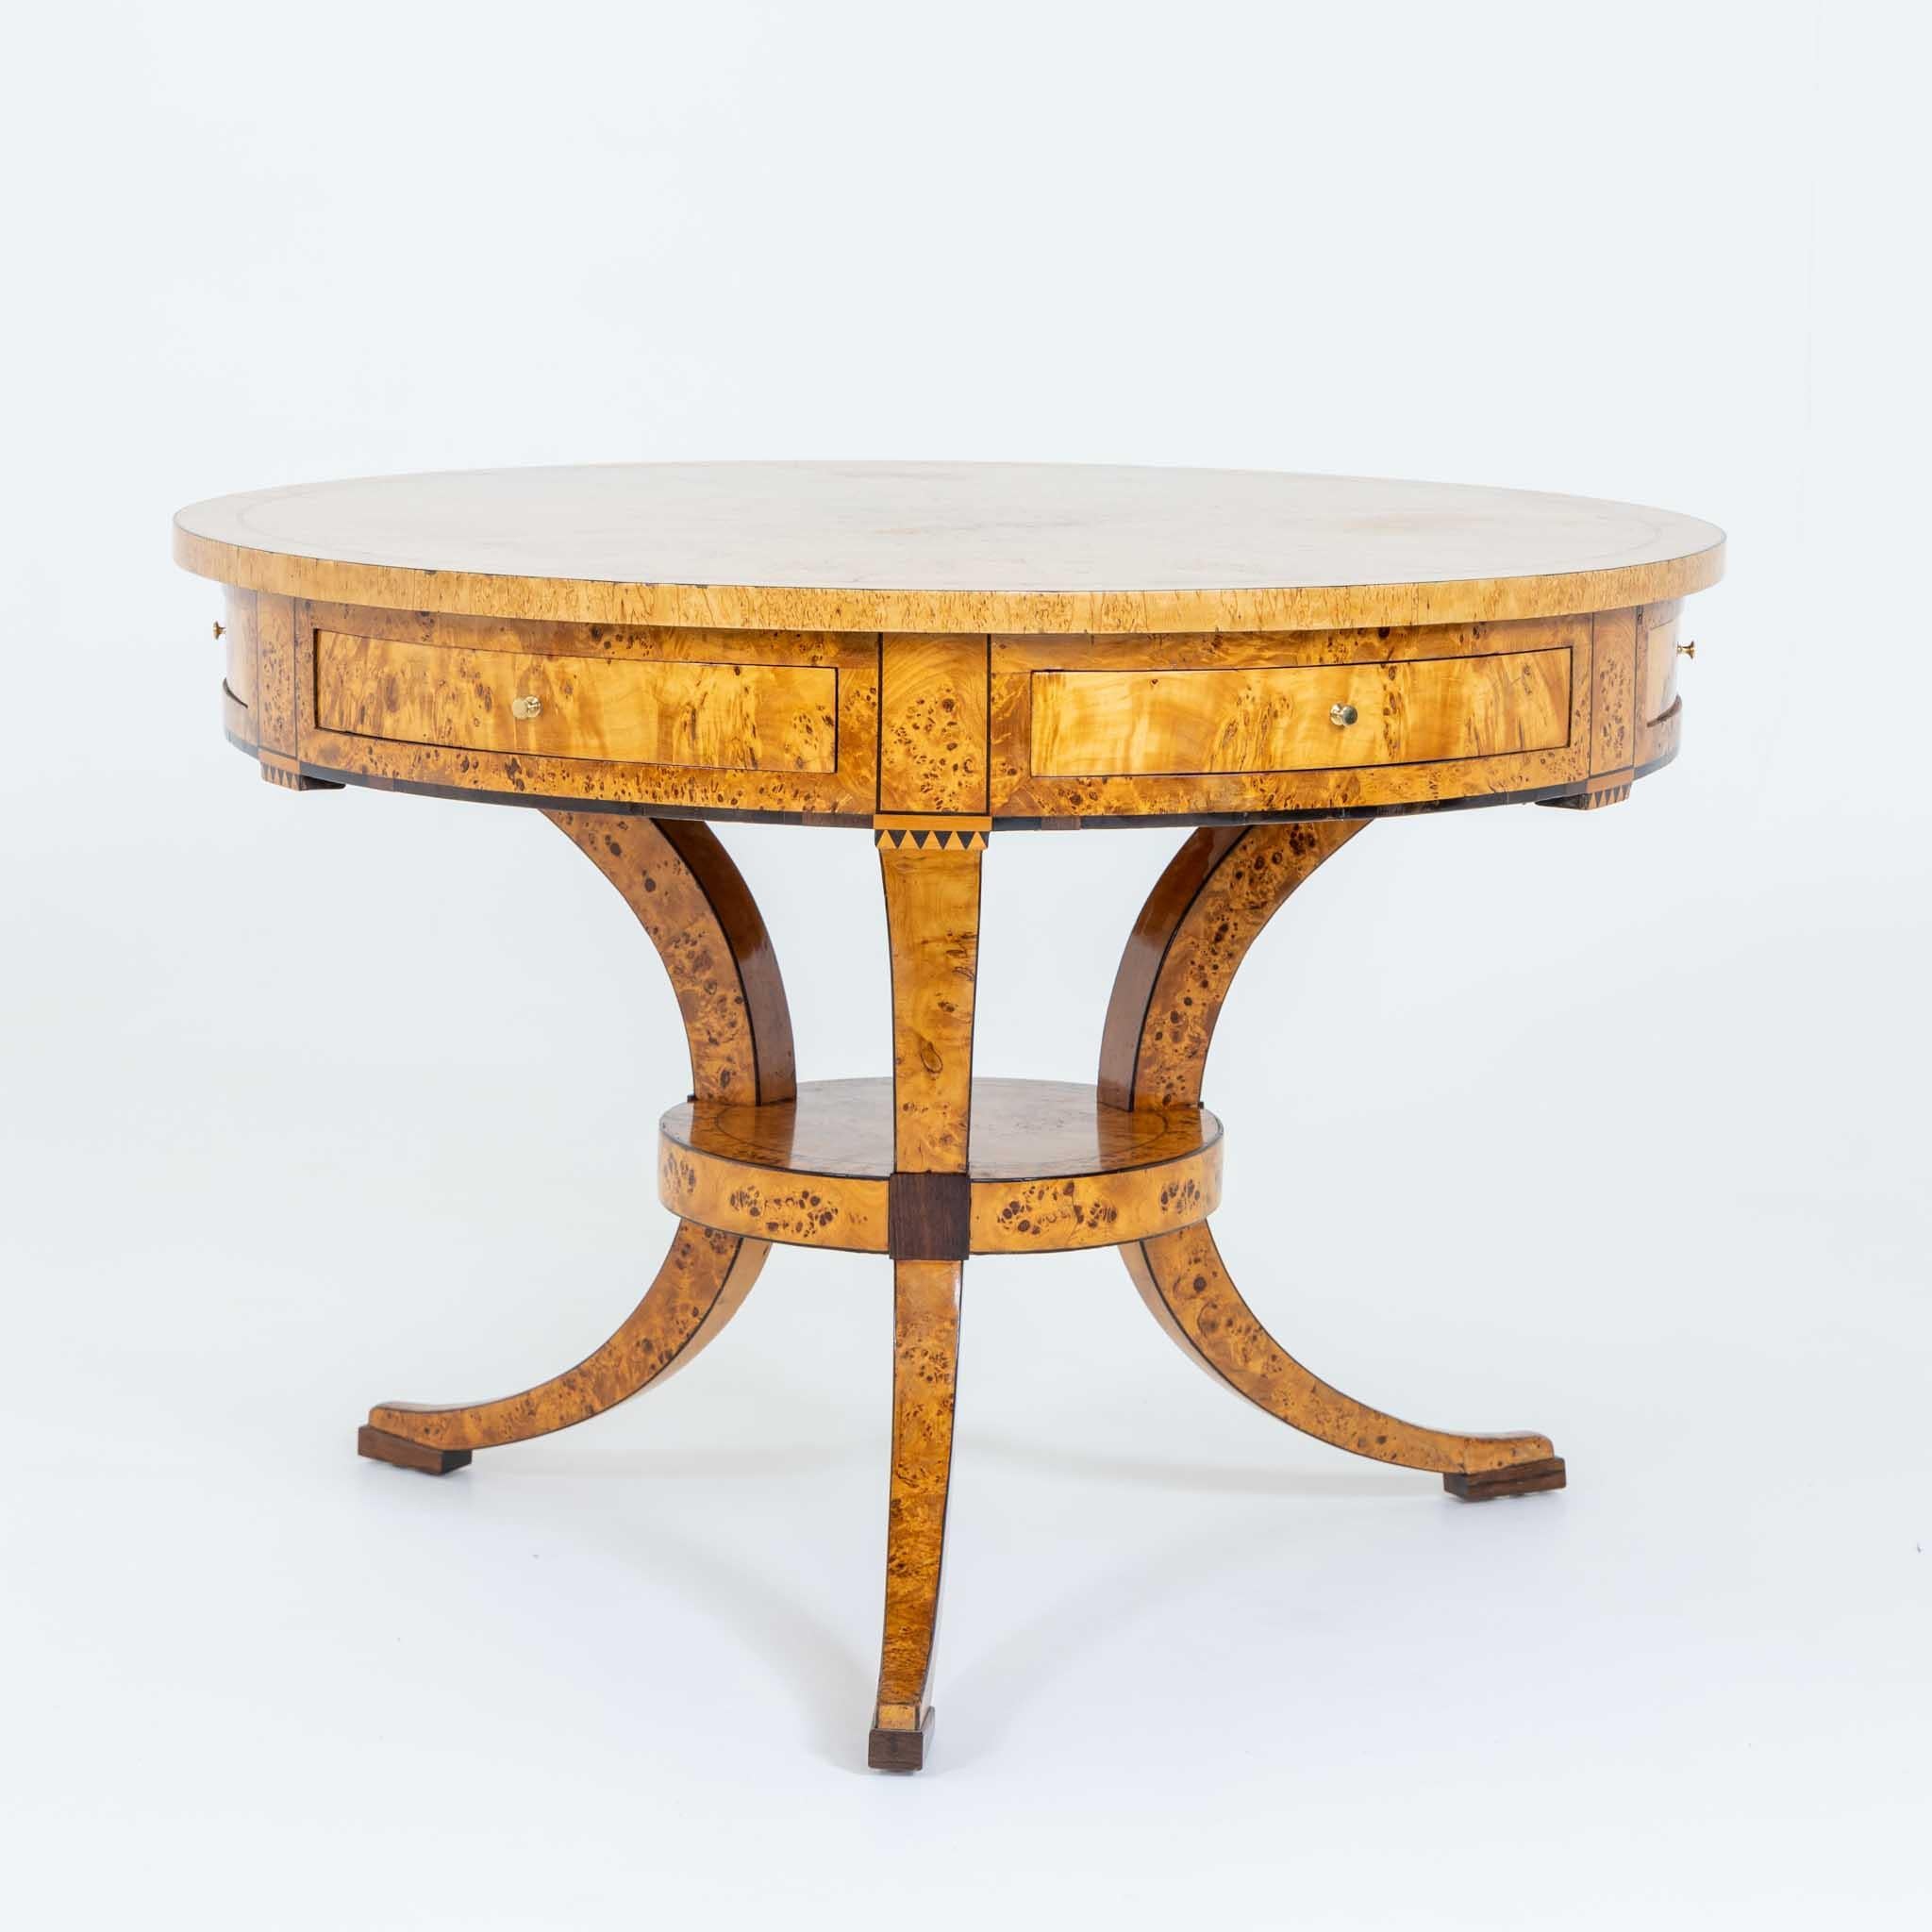 Polished Biedermeier Game Table in Birch, Baltic States, early 19th Century For Sale